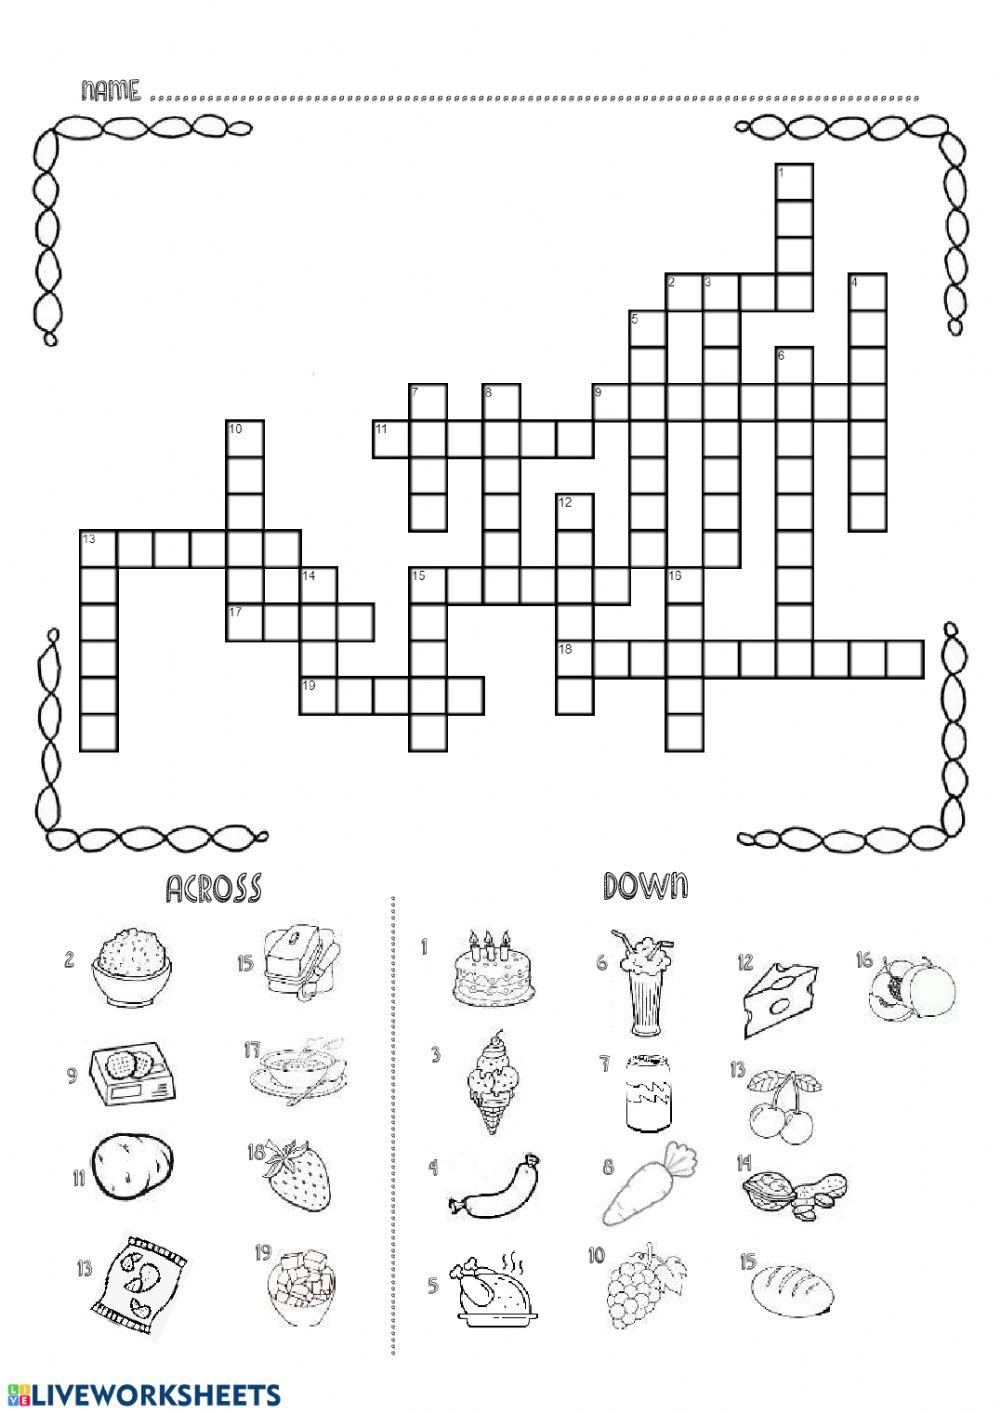 Food and drinks crossword